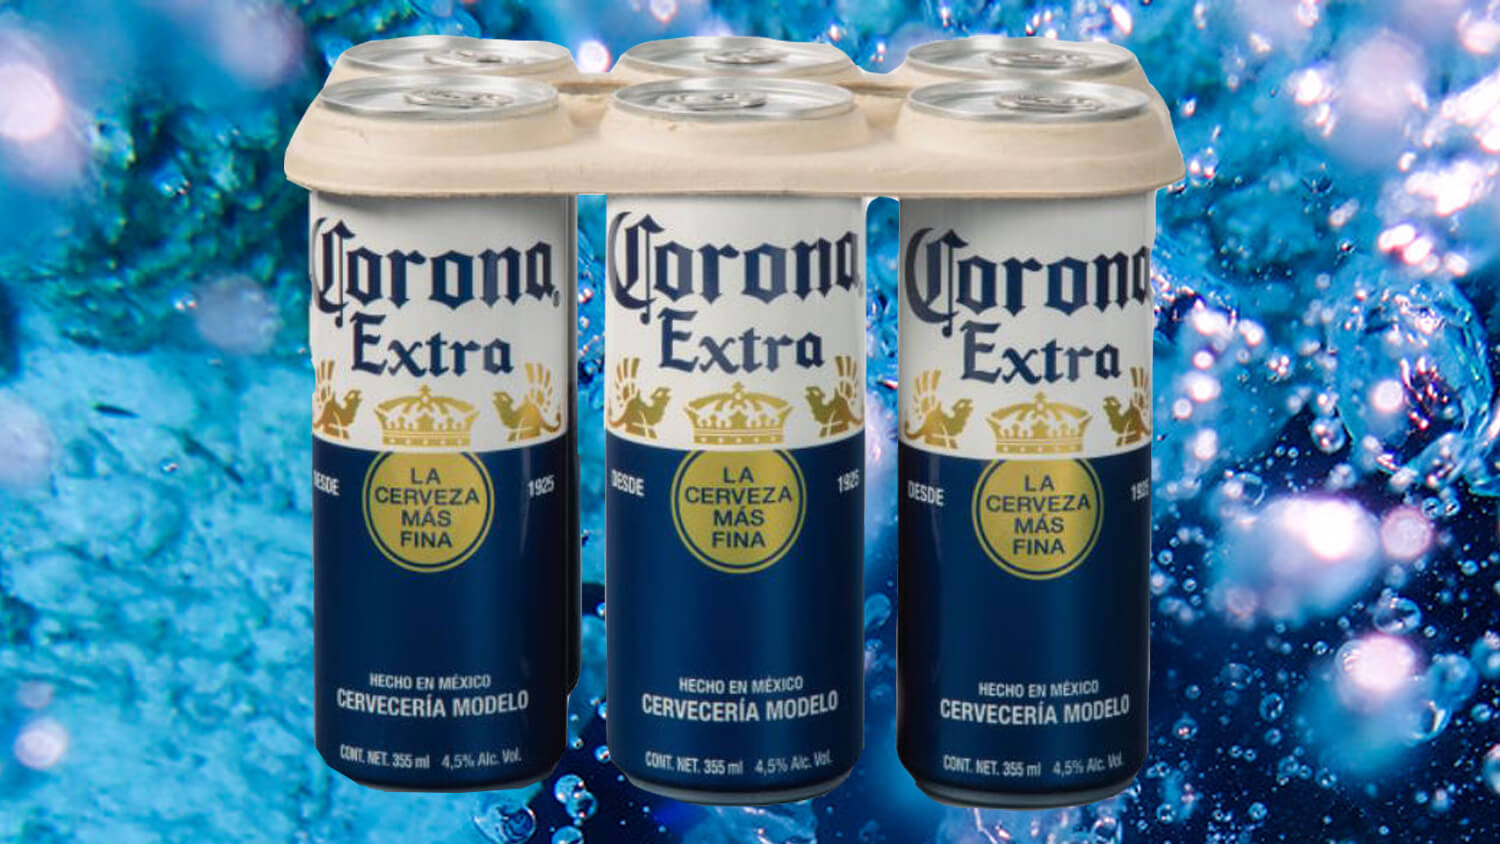 Corona Beer Trialing Plant-Based Biodegradable Plastic-Free Six-Pack Rings